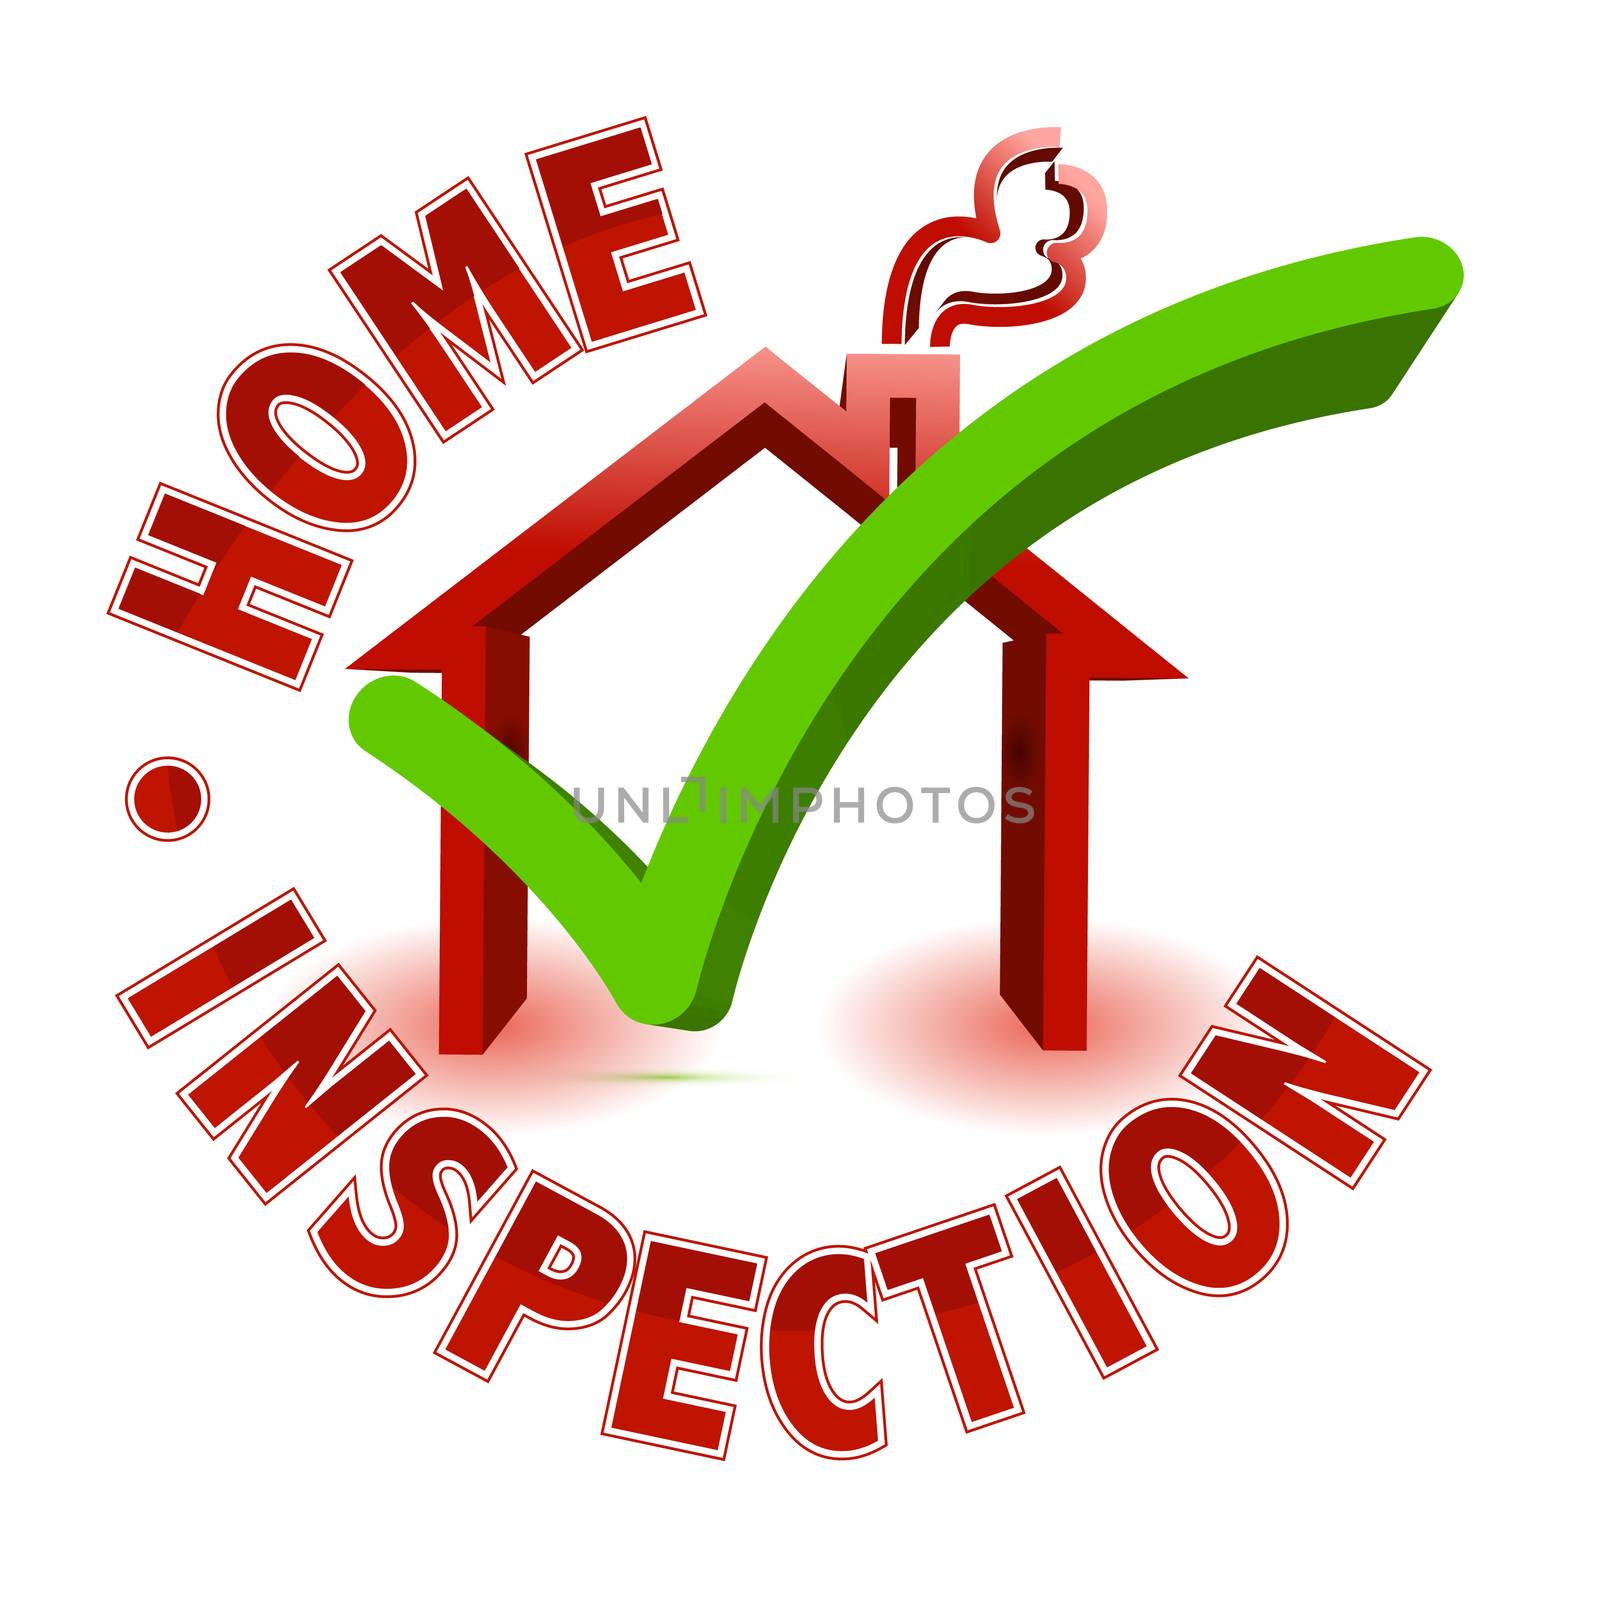 Home inspection by alexmillos